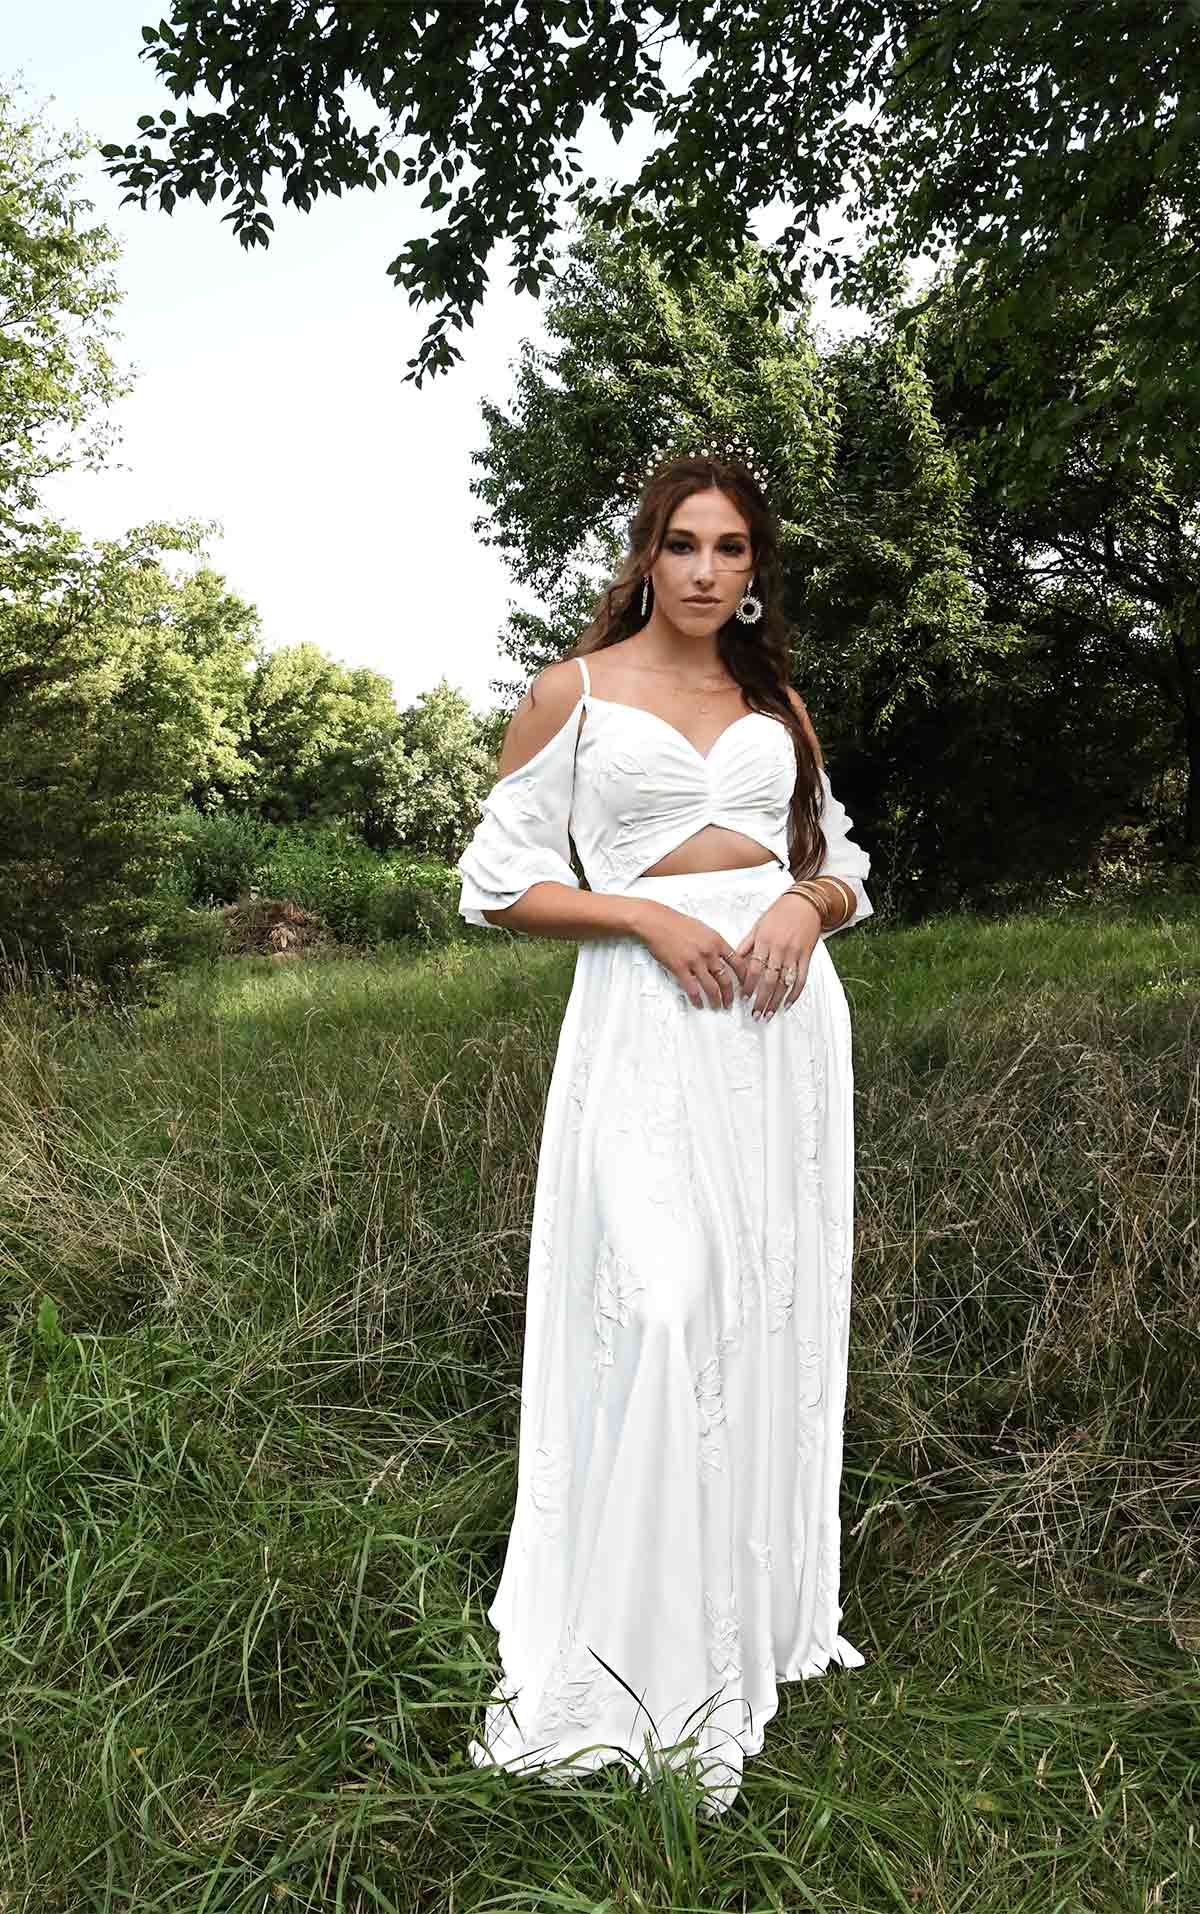 THEA Crepe Boho Beach Wedding Dress with Off-Shoulder Sleeves and Cutouts by All Who Wander